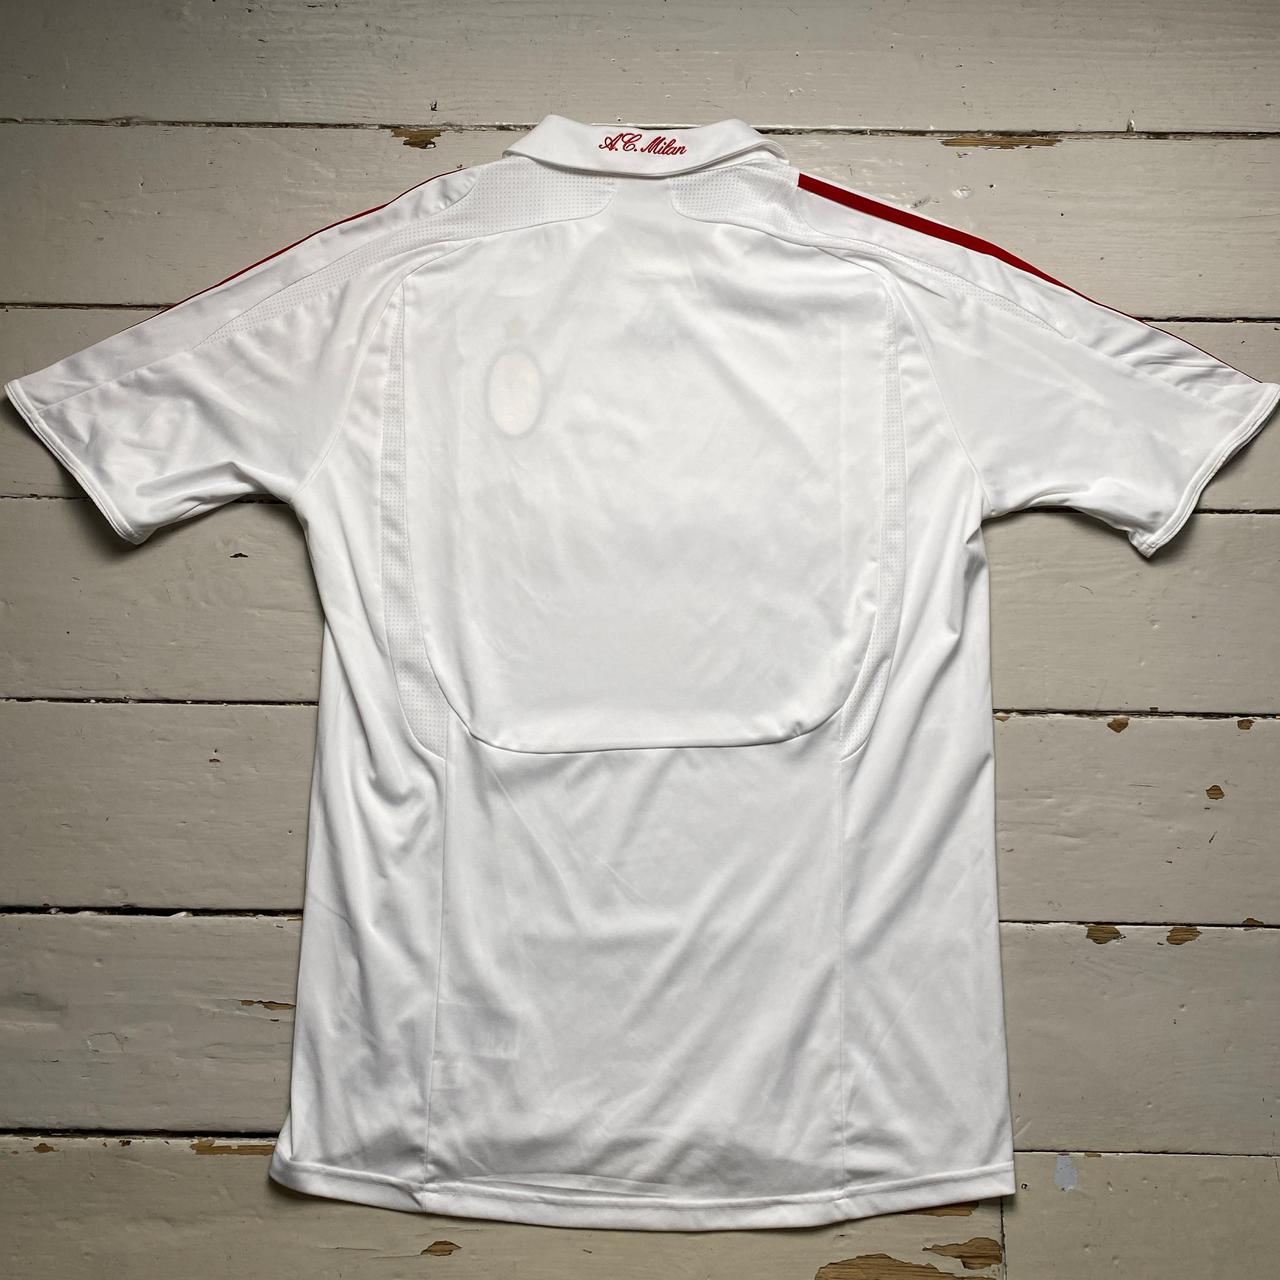 AC Milan Vintage BWIN Adidas White Red and Black Football Jersey